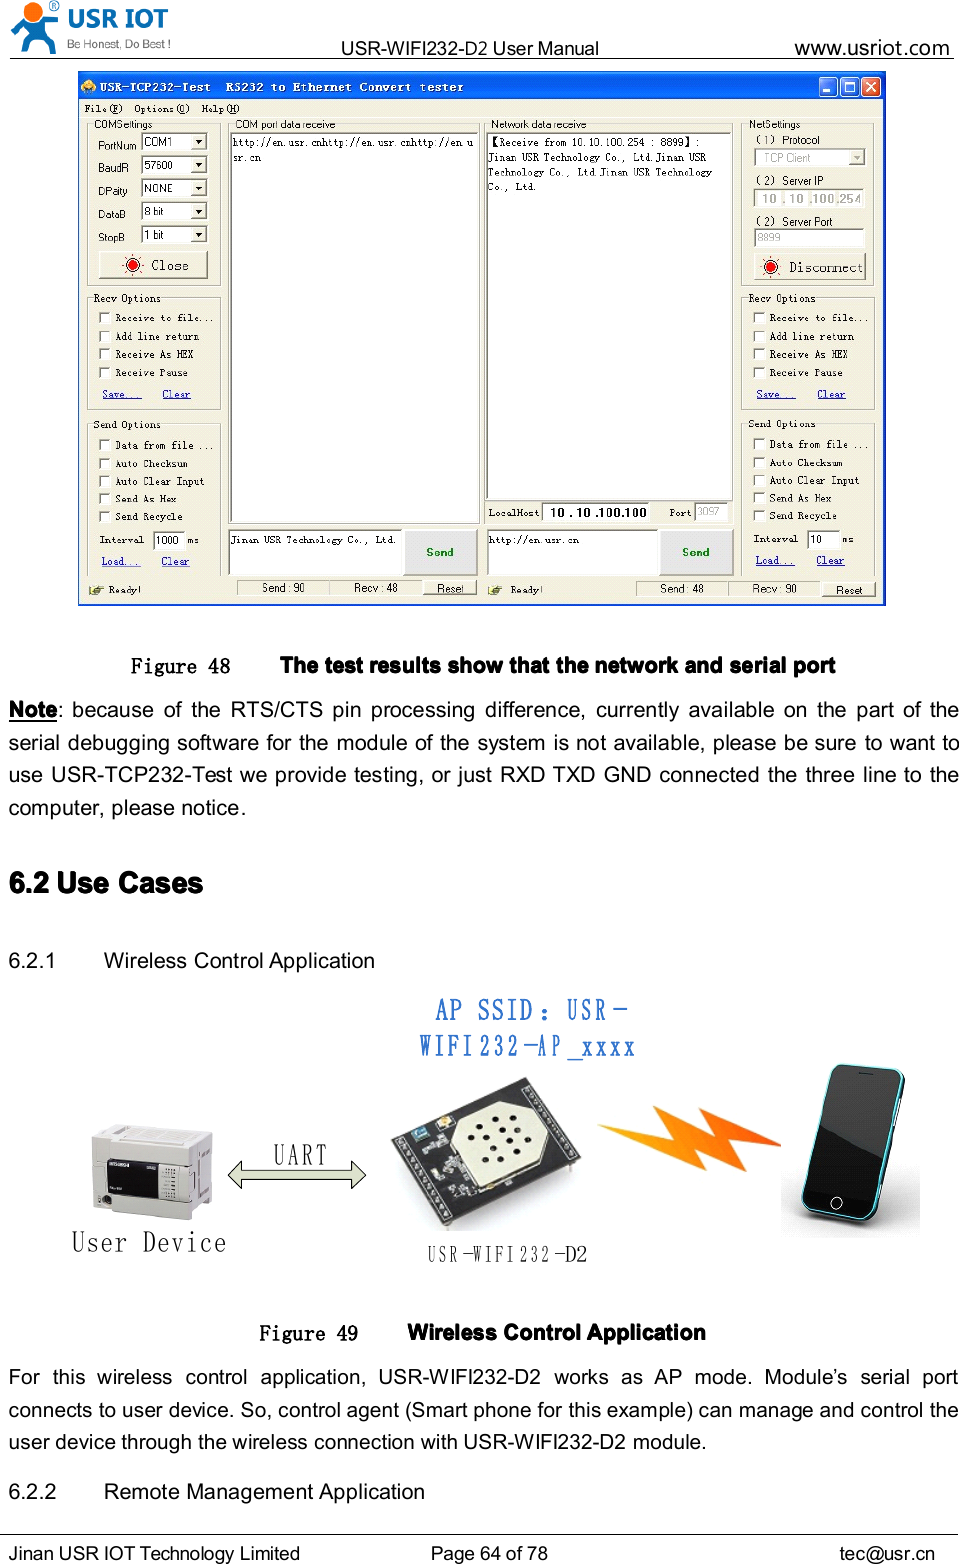 USR-WIFI232- D2 User Manual www.usr iot .comJinan USR IOT Technology Limited Page 64 of 78 tec@usr.cnFigure 48 TheTheTheThe testtesttesttest resultsresultsresultsresults showshowshowshow thatthatthatthat thethethethe networknetworknetworknetwork andandandand serialserialserialserial portportportportNoteNoteNoteNote : because of the RTS/CTS pin processing difference, currently available on the part of theserial debugging software for the module of the system is not available, please be sure to want touse USR-TCP232-Test we provide testing, or just RXD TXD GND connected the three line to thecomputer, please notice .6.26.26.26.2 UseUseUseUse CasesCasesCasesCases6.2.1 Wireless Control ApplicationUSR-WIFI232-D2User DeviceAP SSID：USR-WIFI232-AP_xxxxUARTFigure 49 WirelessWirelessWirelessWireless ControlControlControlControl ApplicationApplicationApplicationApplicationFor this wireless control application, USR-WIFI232-D2 works as AP mode. Module ’ s serial portconnects to user device. So, control agent (Smart phone for this example) can manage and control theuser device through the wireless connection with USR-WIFI232-D2 module.6.2.2 Remote Management Application